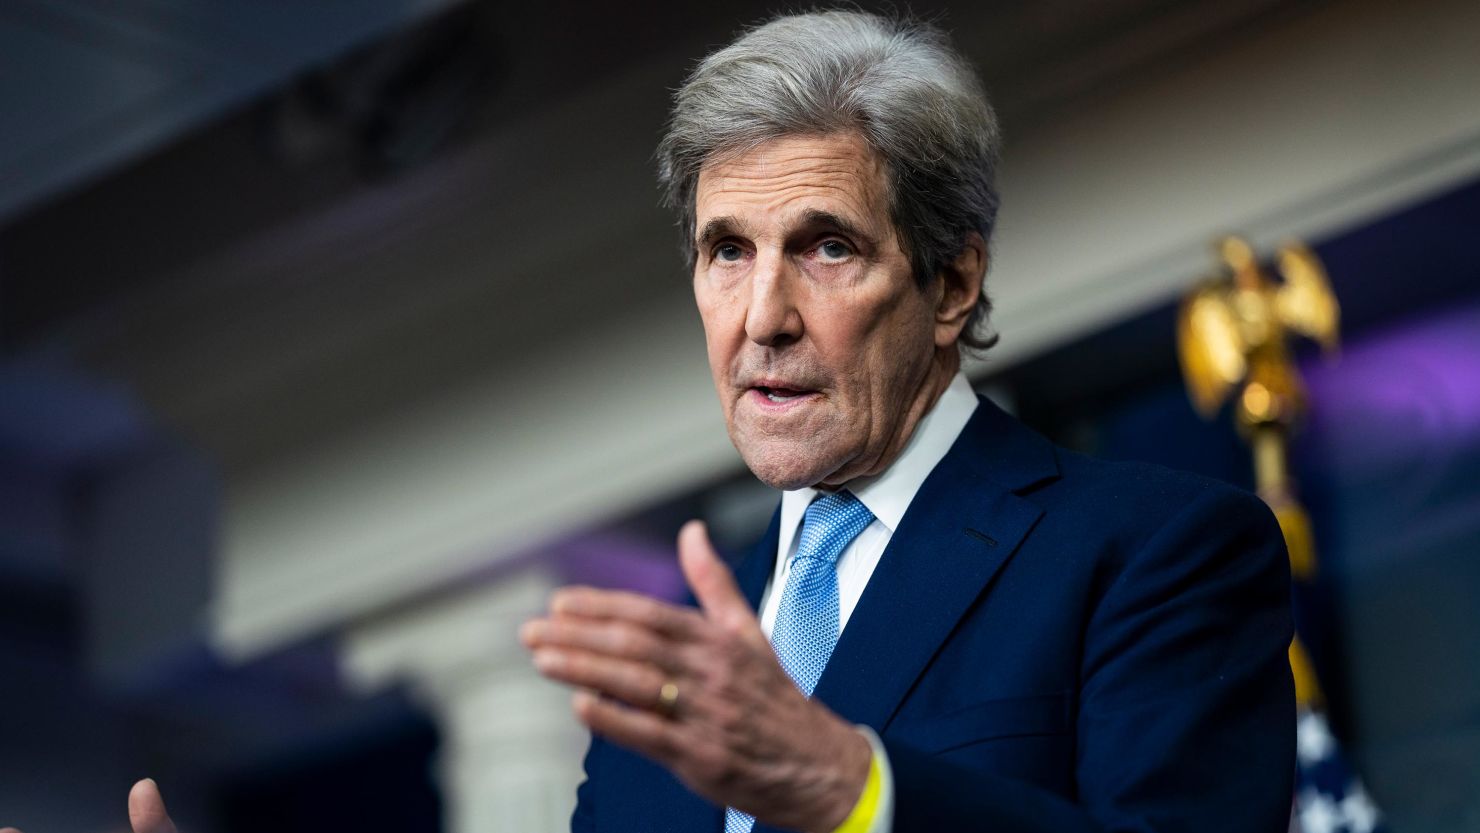 Special Presidential Envoy for Climate John Kerry speaks during a press briefing at the White House in April.